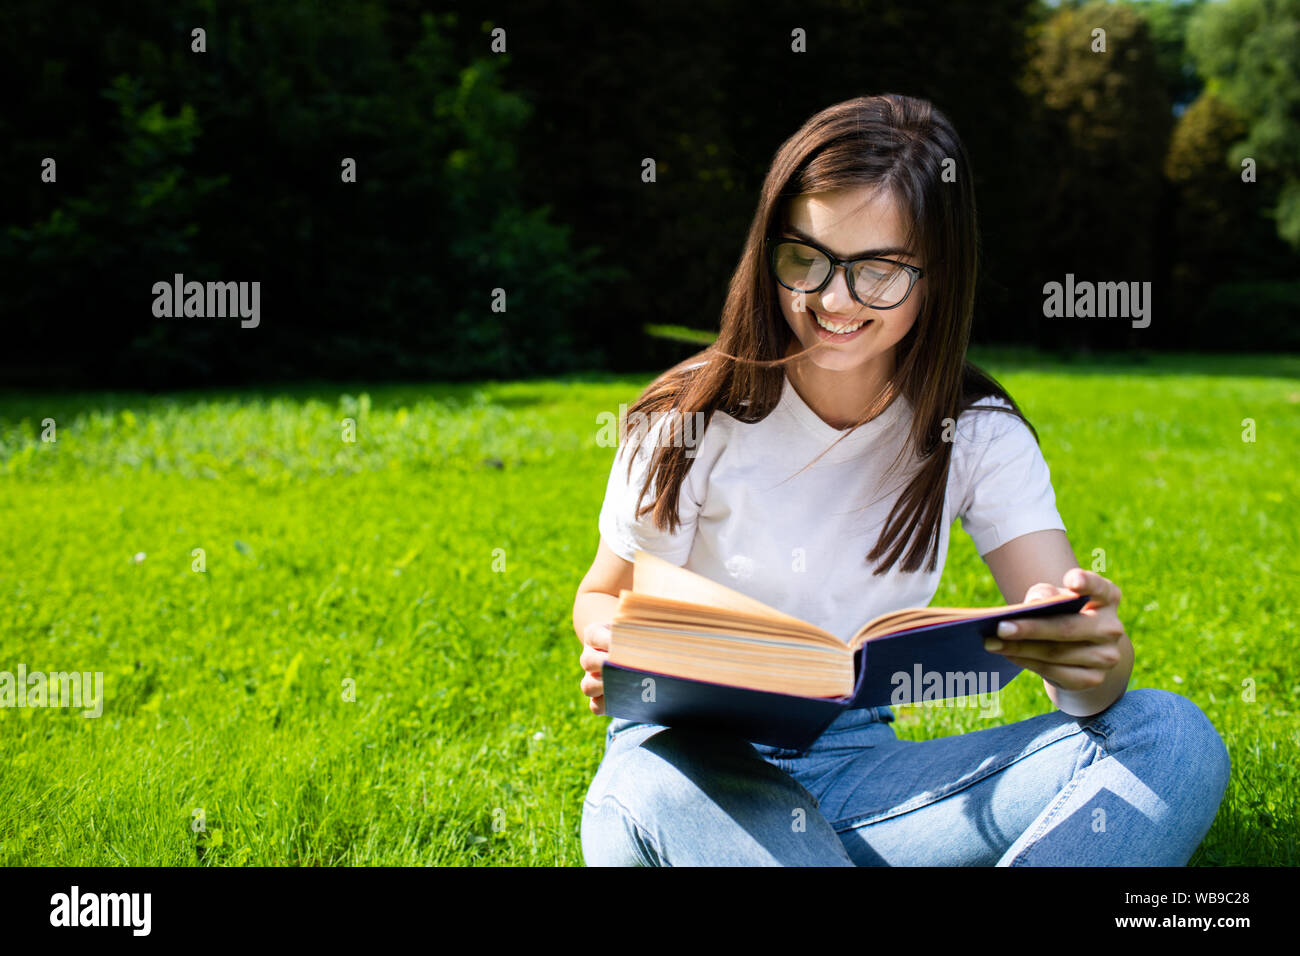 Enthusiastic student girl with book studying in campus park Stock Photo